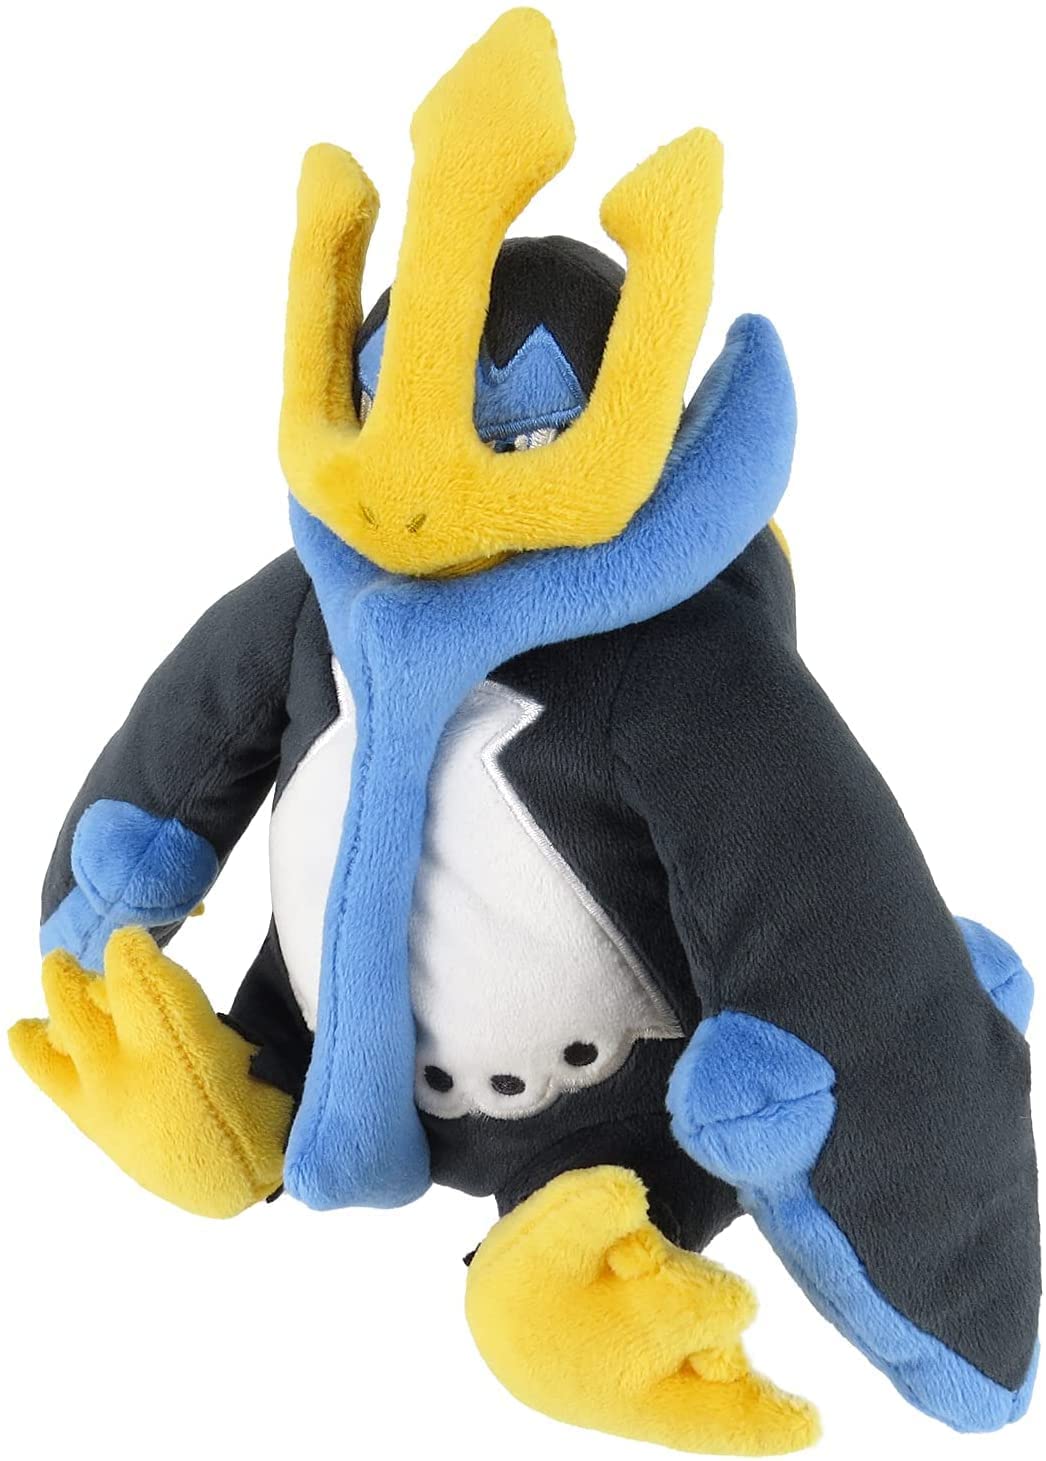 Sanei All Star Collection 8 Inch Plush - Empoleon PP208